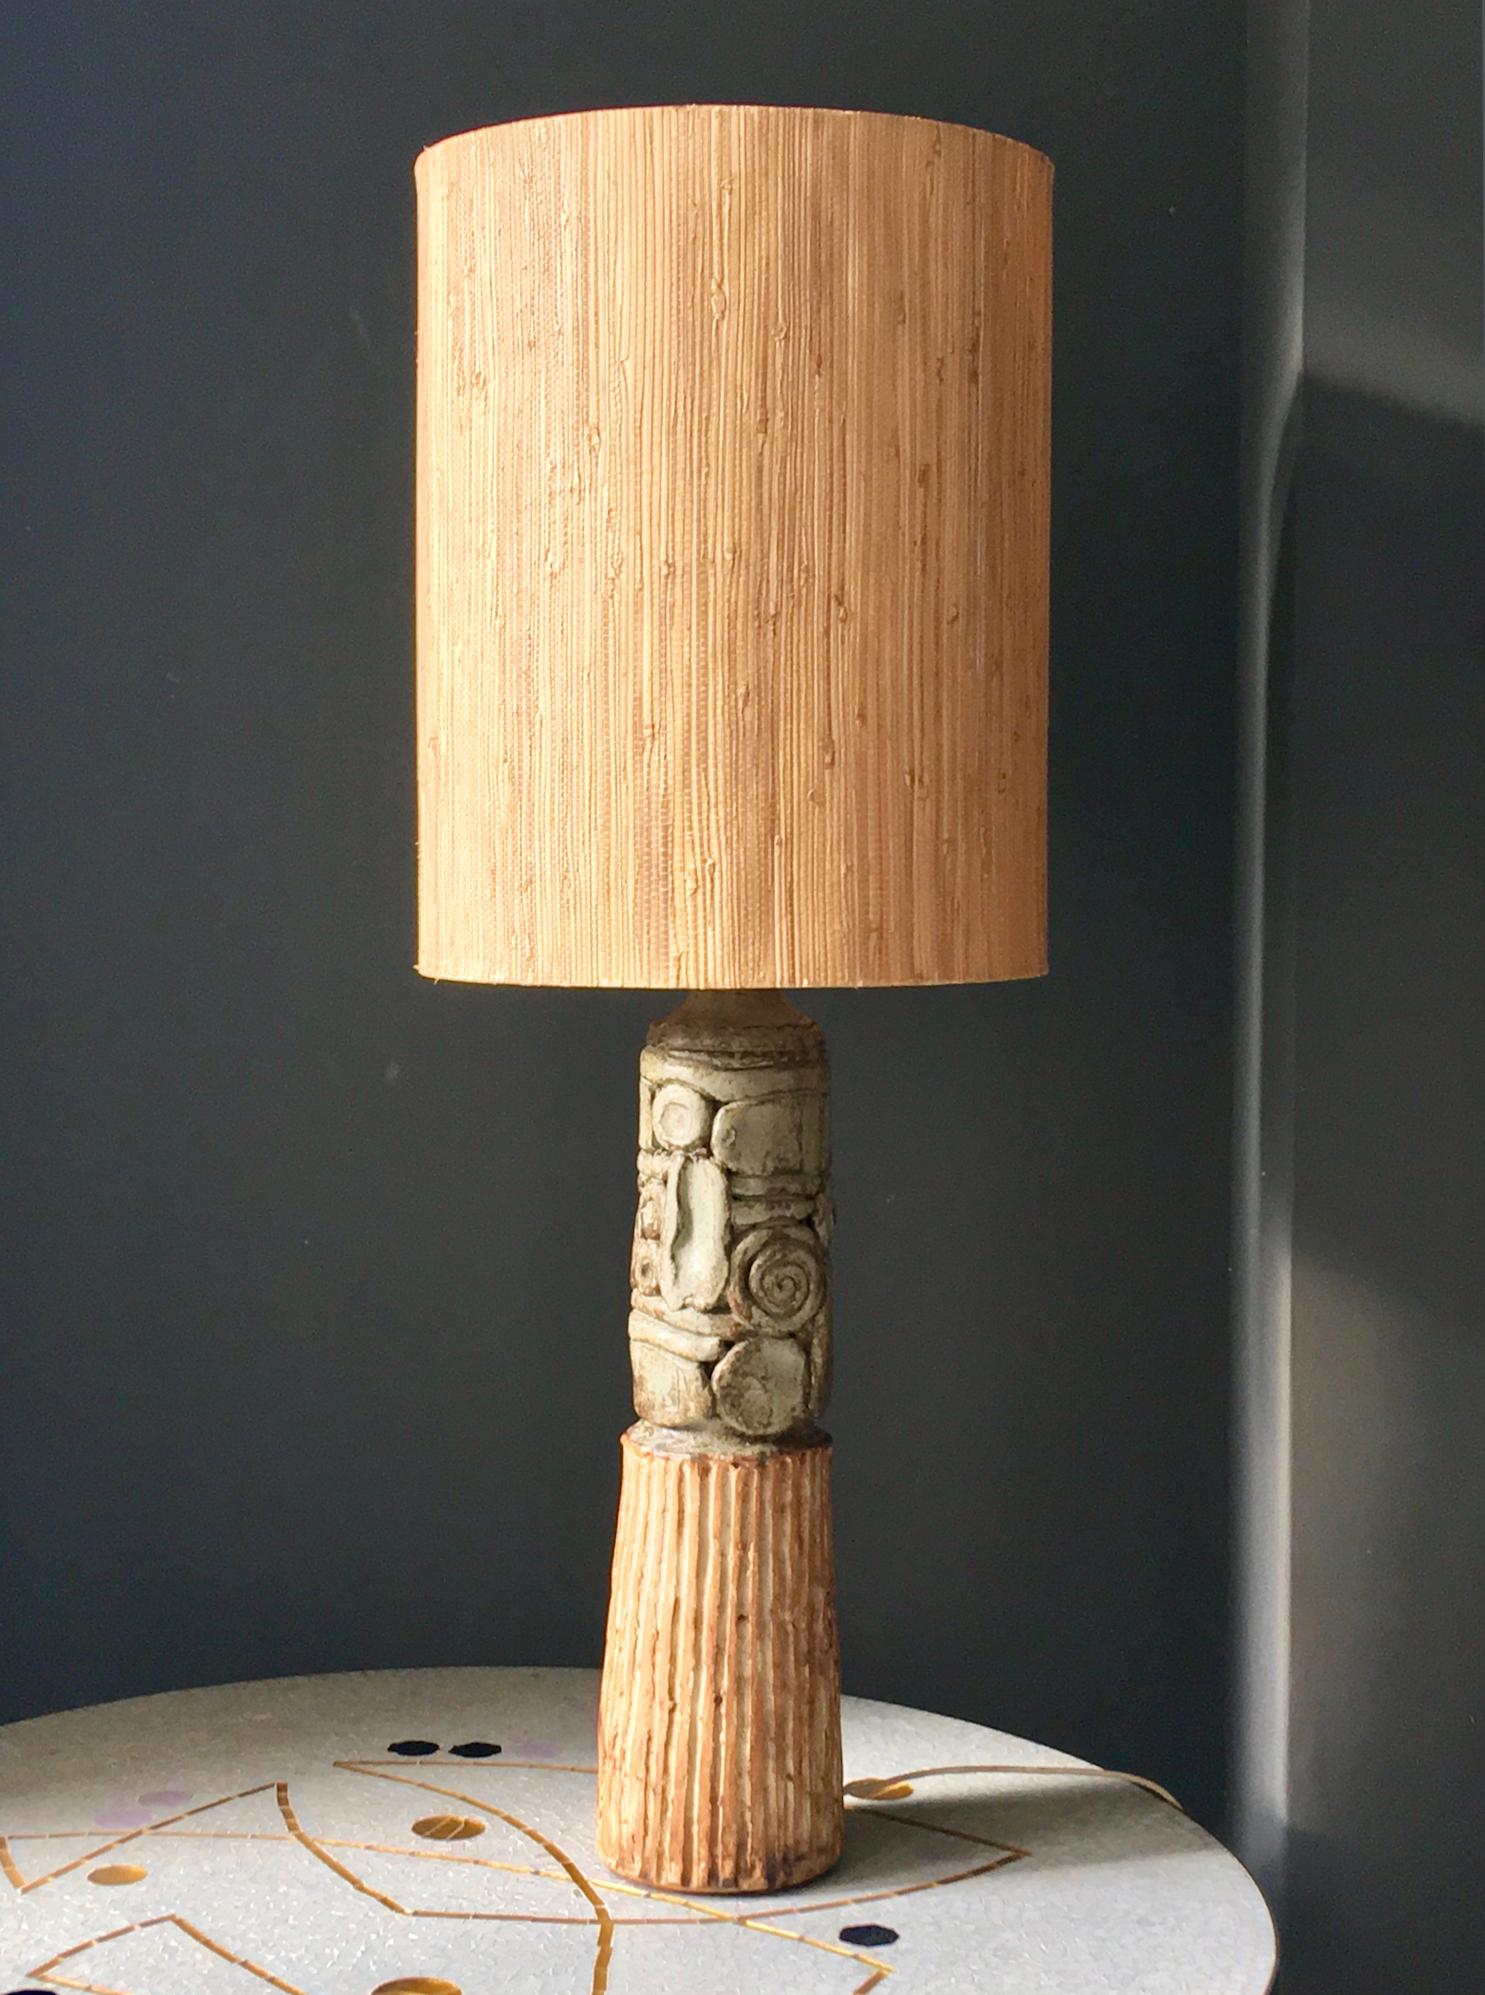 Monumental or oversize studio ceramic table lamp in natural tones by Bernard Rooke, England mid-20th century.

A beautiful statement piece, made up of a ceramic base with organic patterns in natural tones of sand and stone, together with the